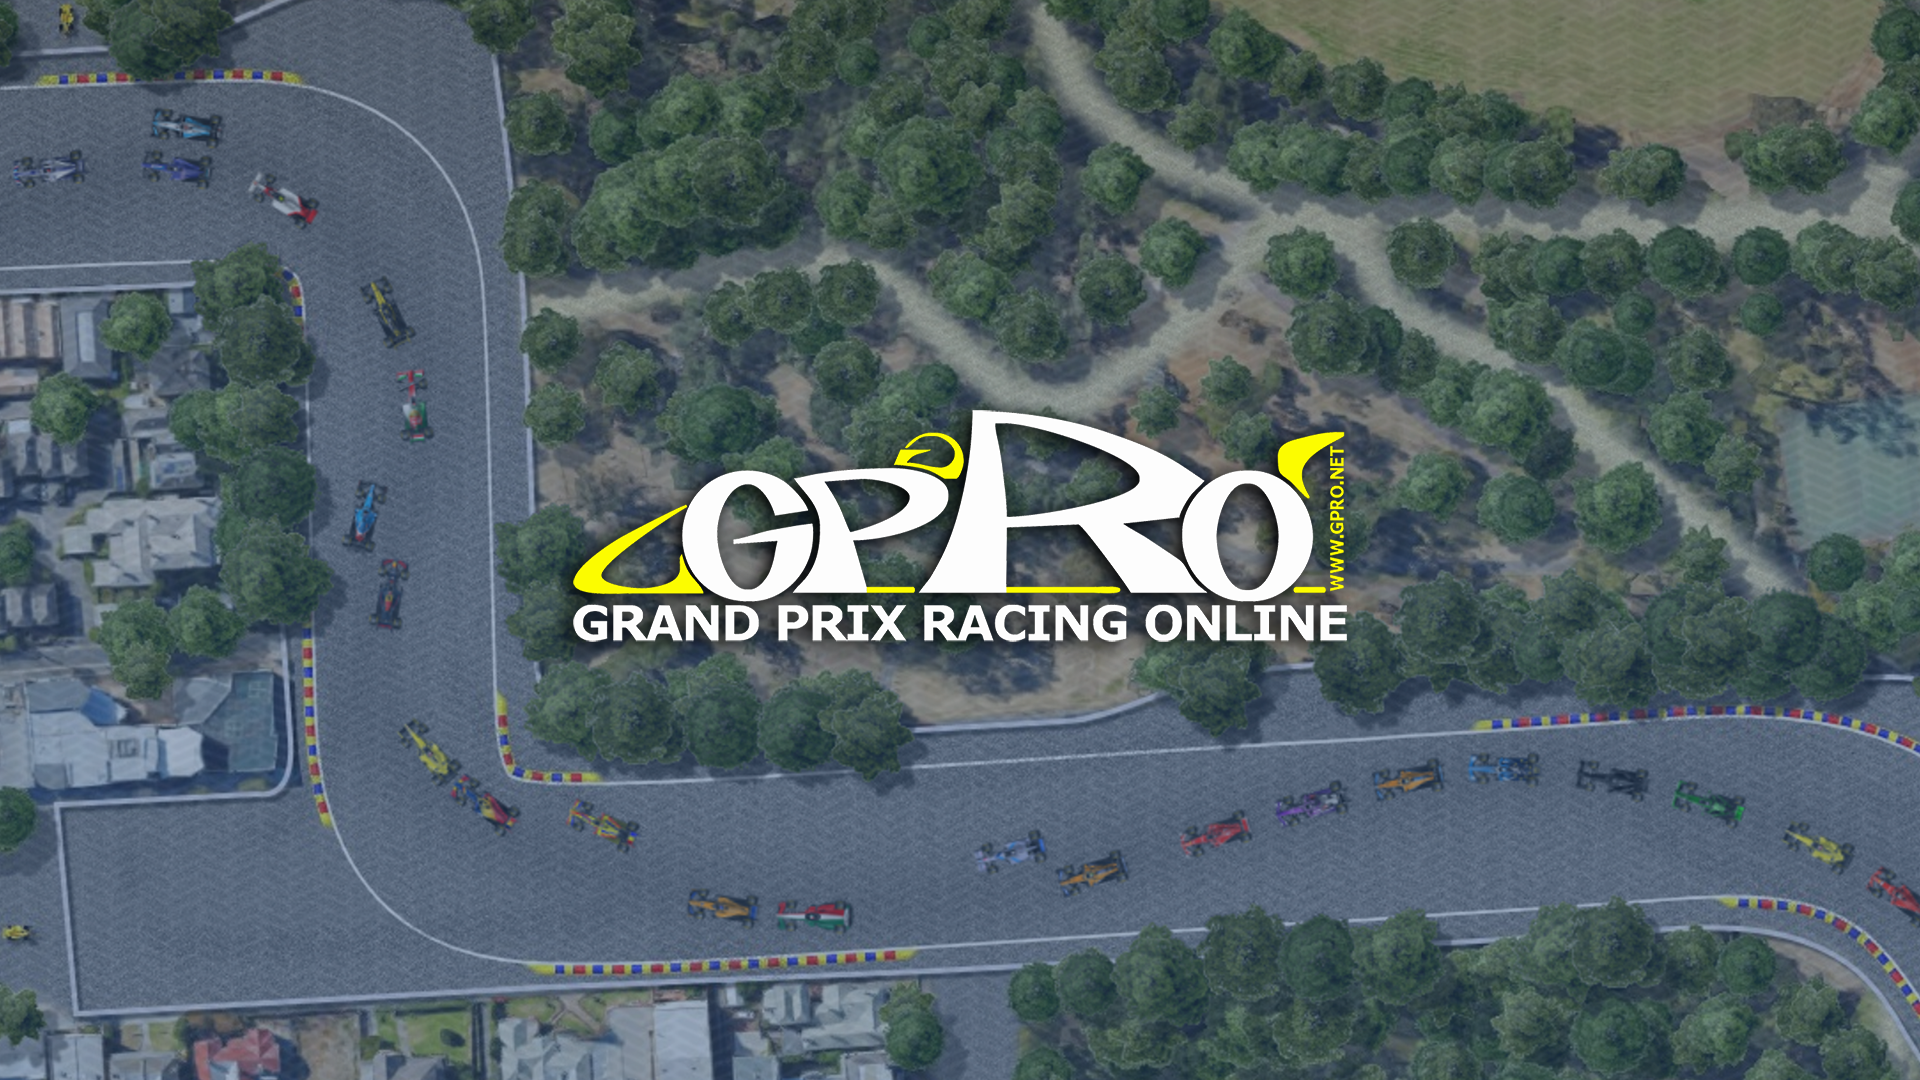 GPRO - Classic racing manager Windows, Mac, Linux, Web, iOS, Android game